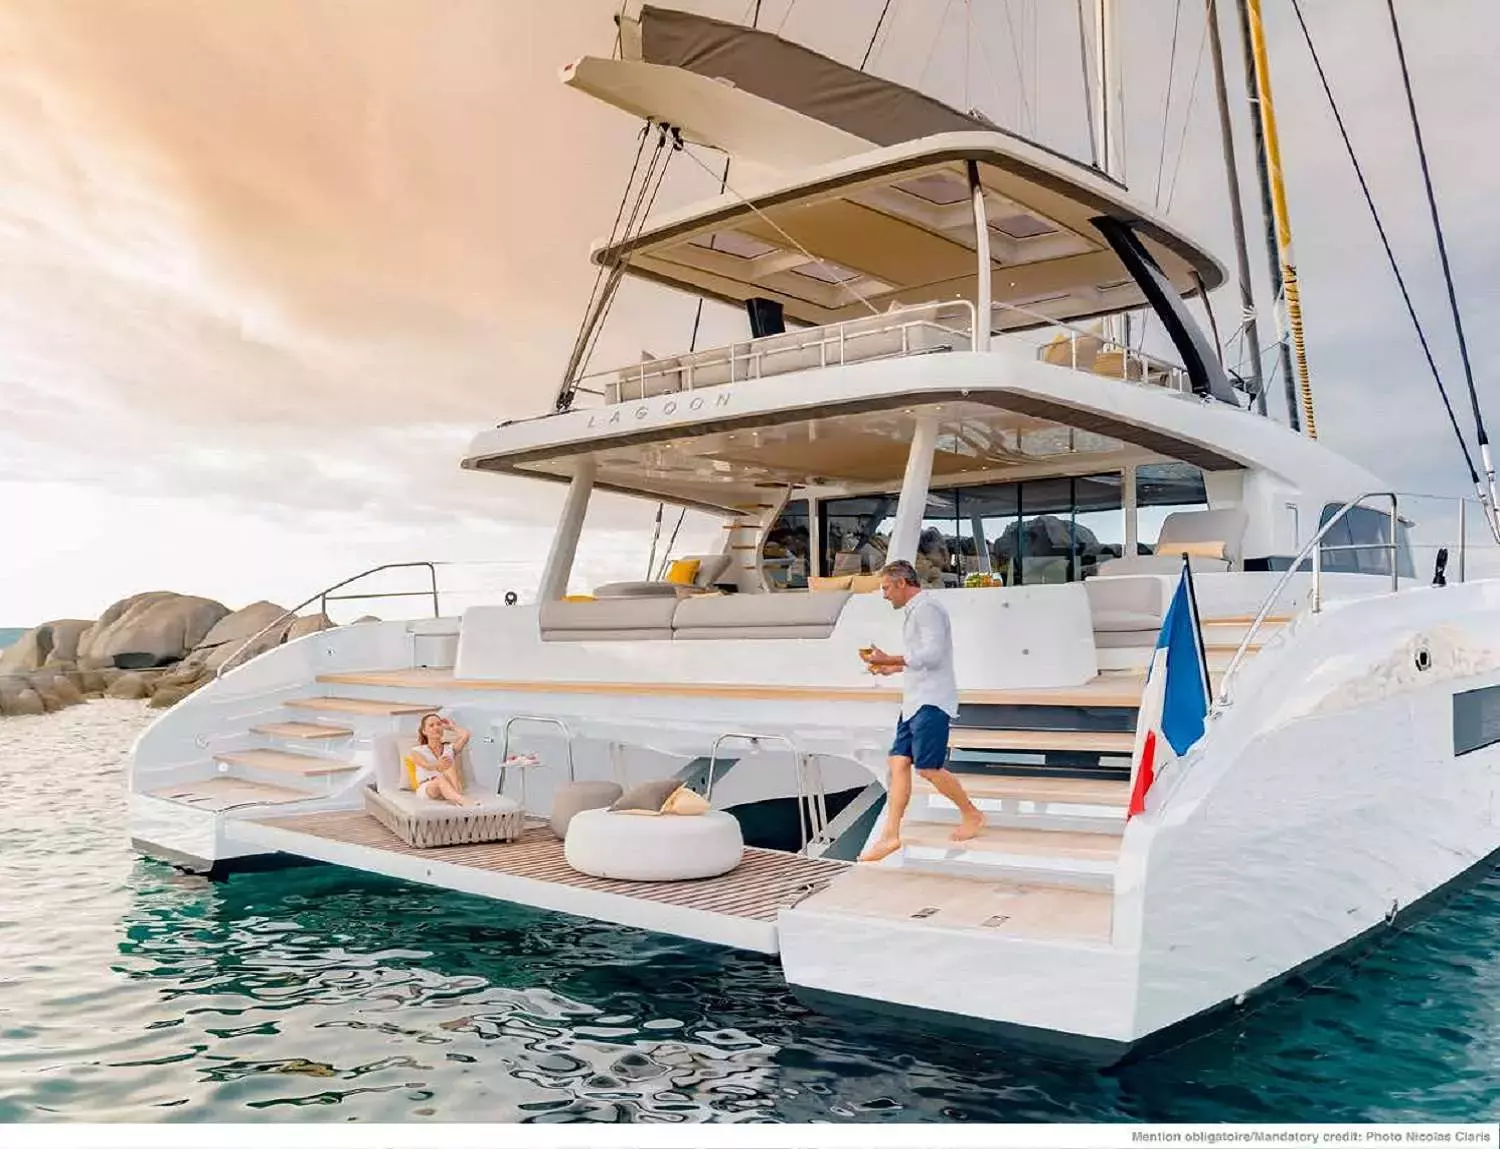 Sylene by Lagoon - Top rates for a Rental of a private Luxury Catamaran in France